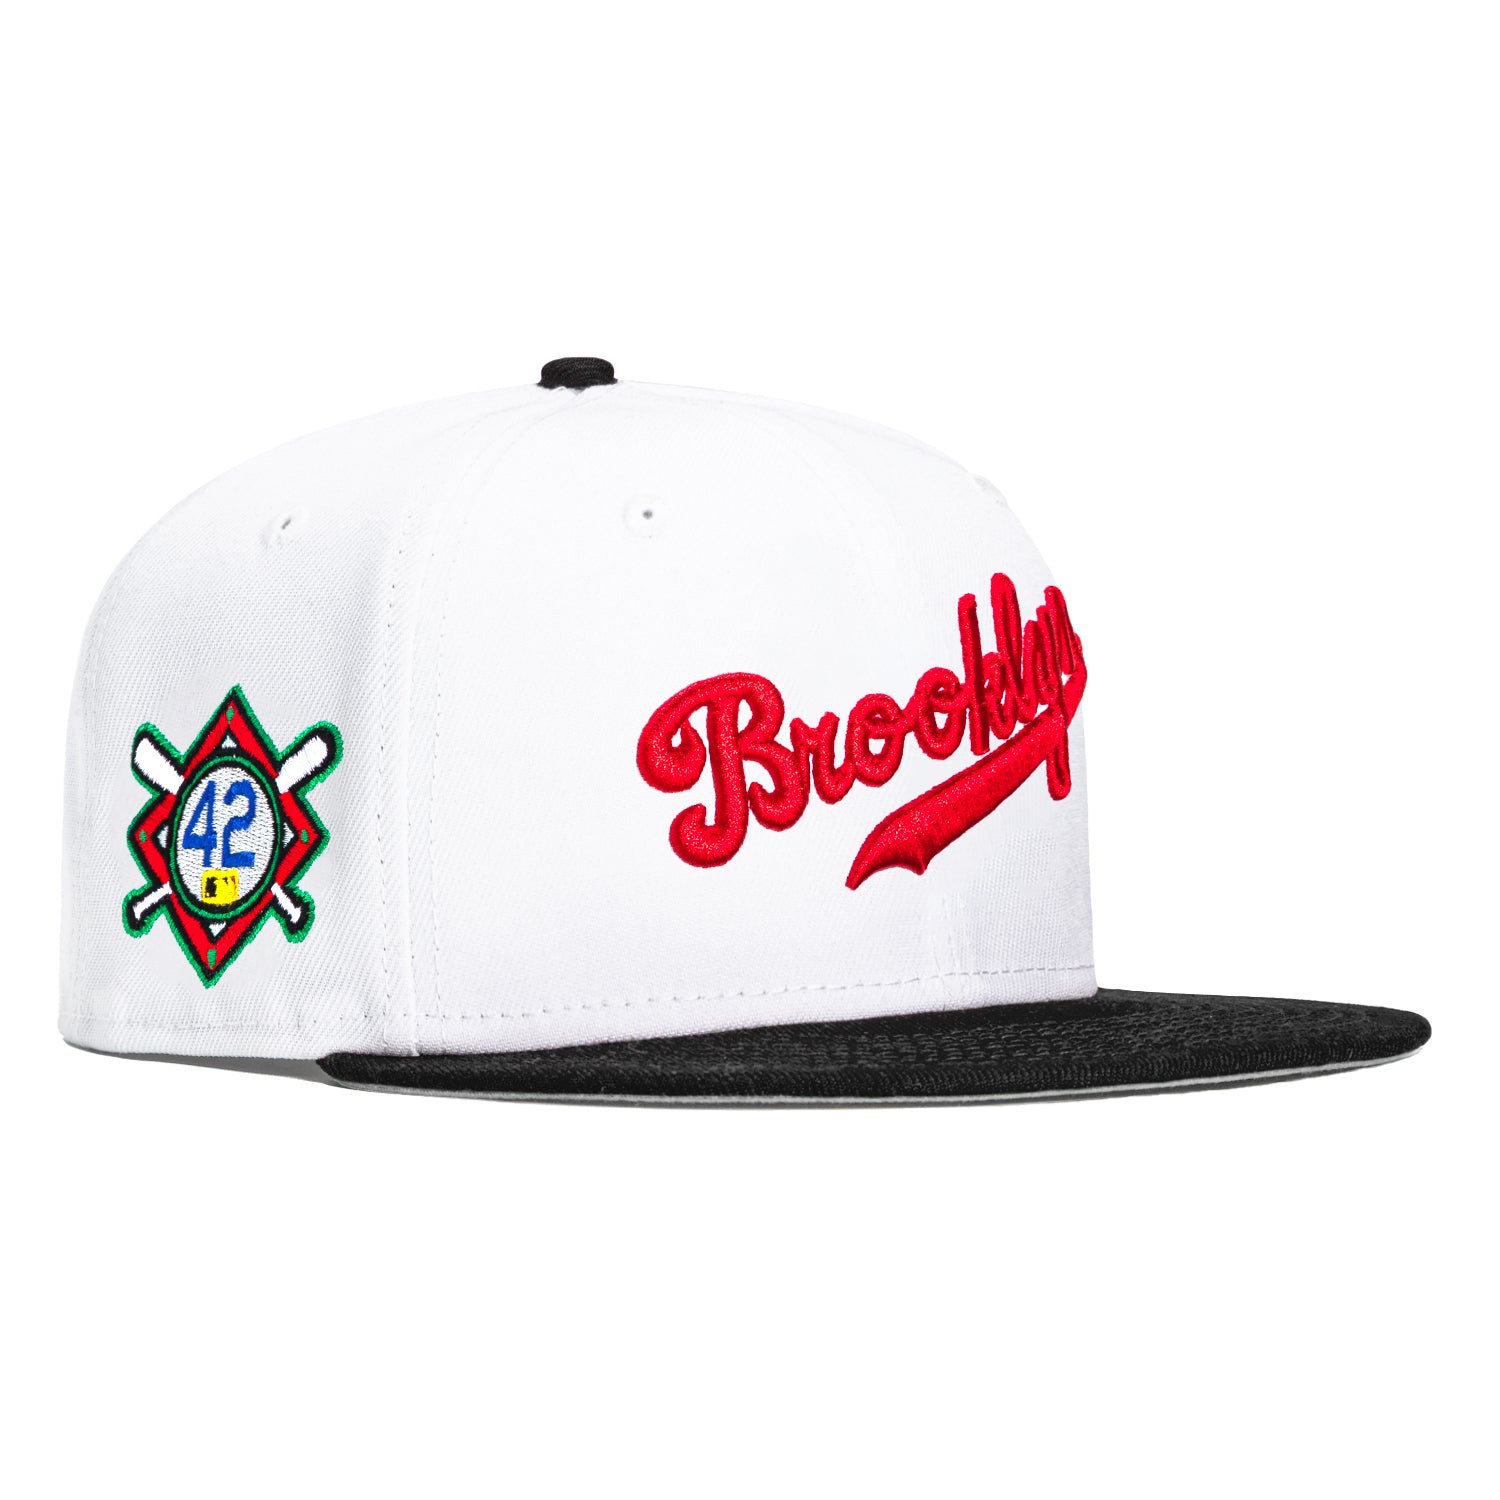 New Era 59FIFTY Spike Brooklyn Dodgers 42 Patch Hat - White, Black, Red White/Black/Red / 7 1/2